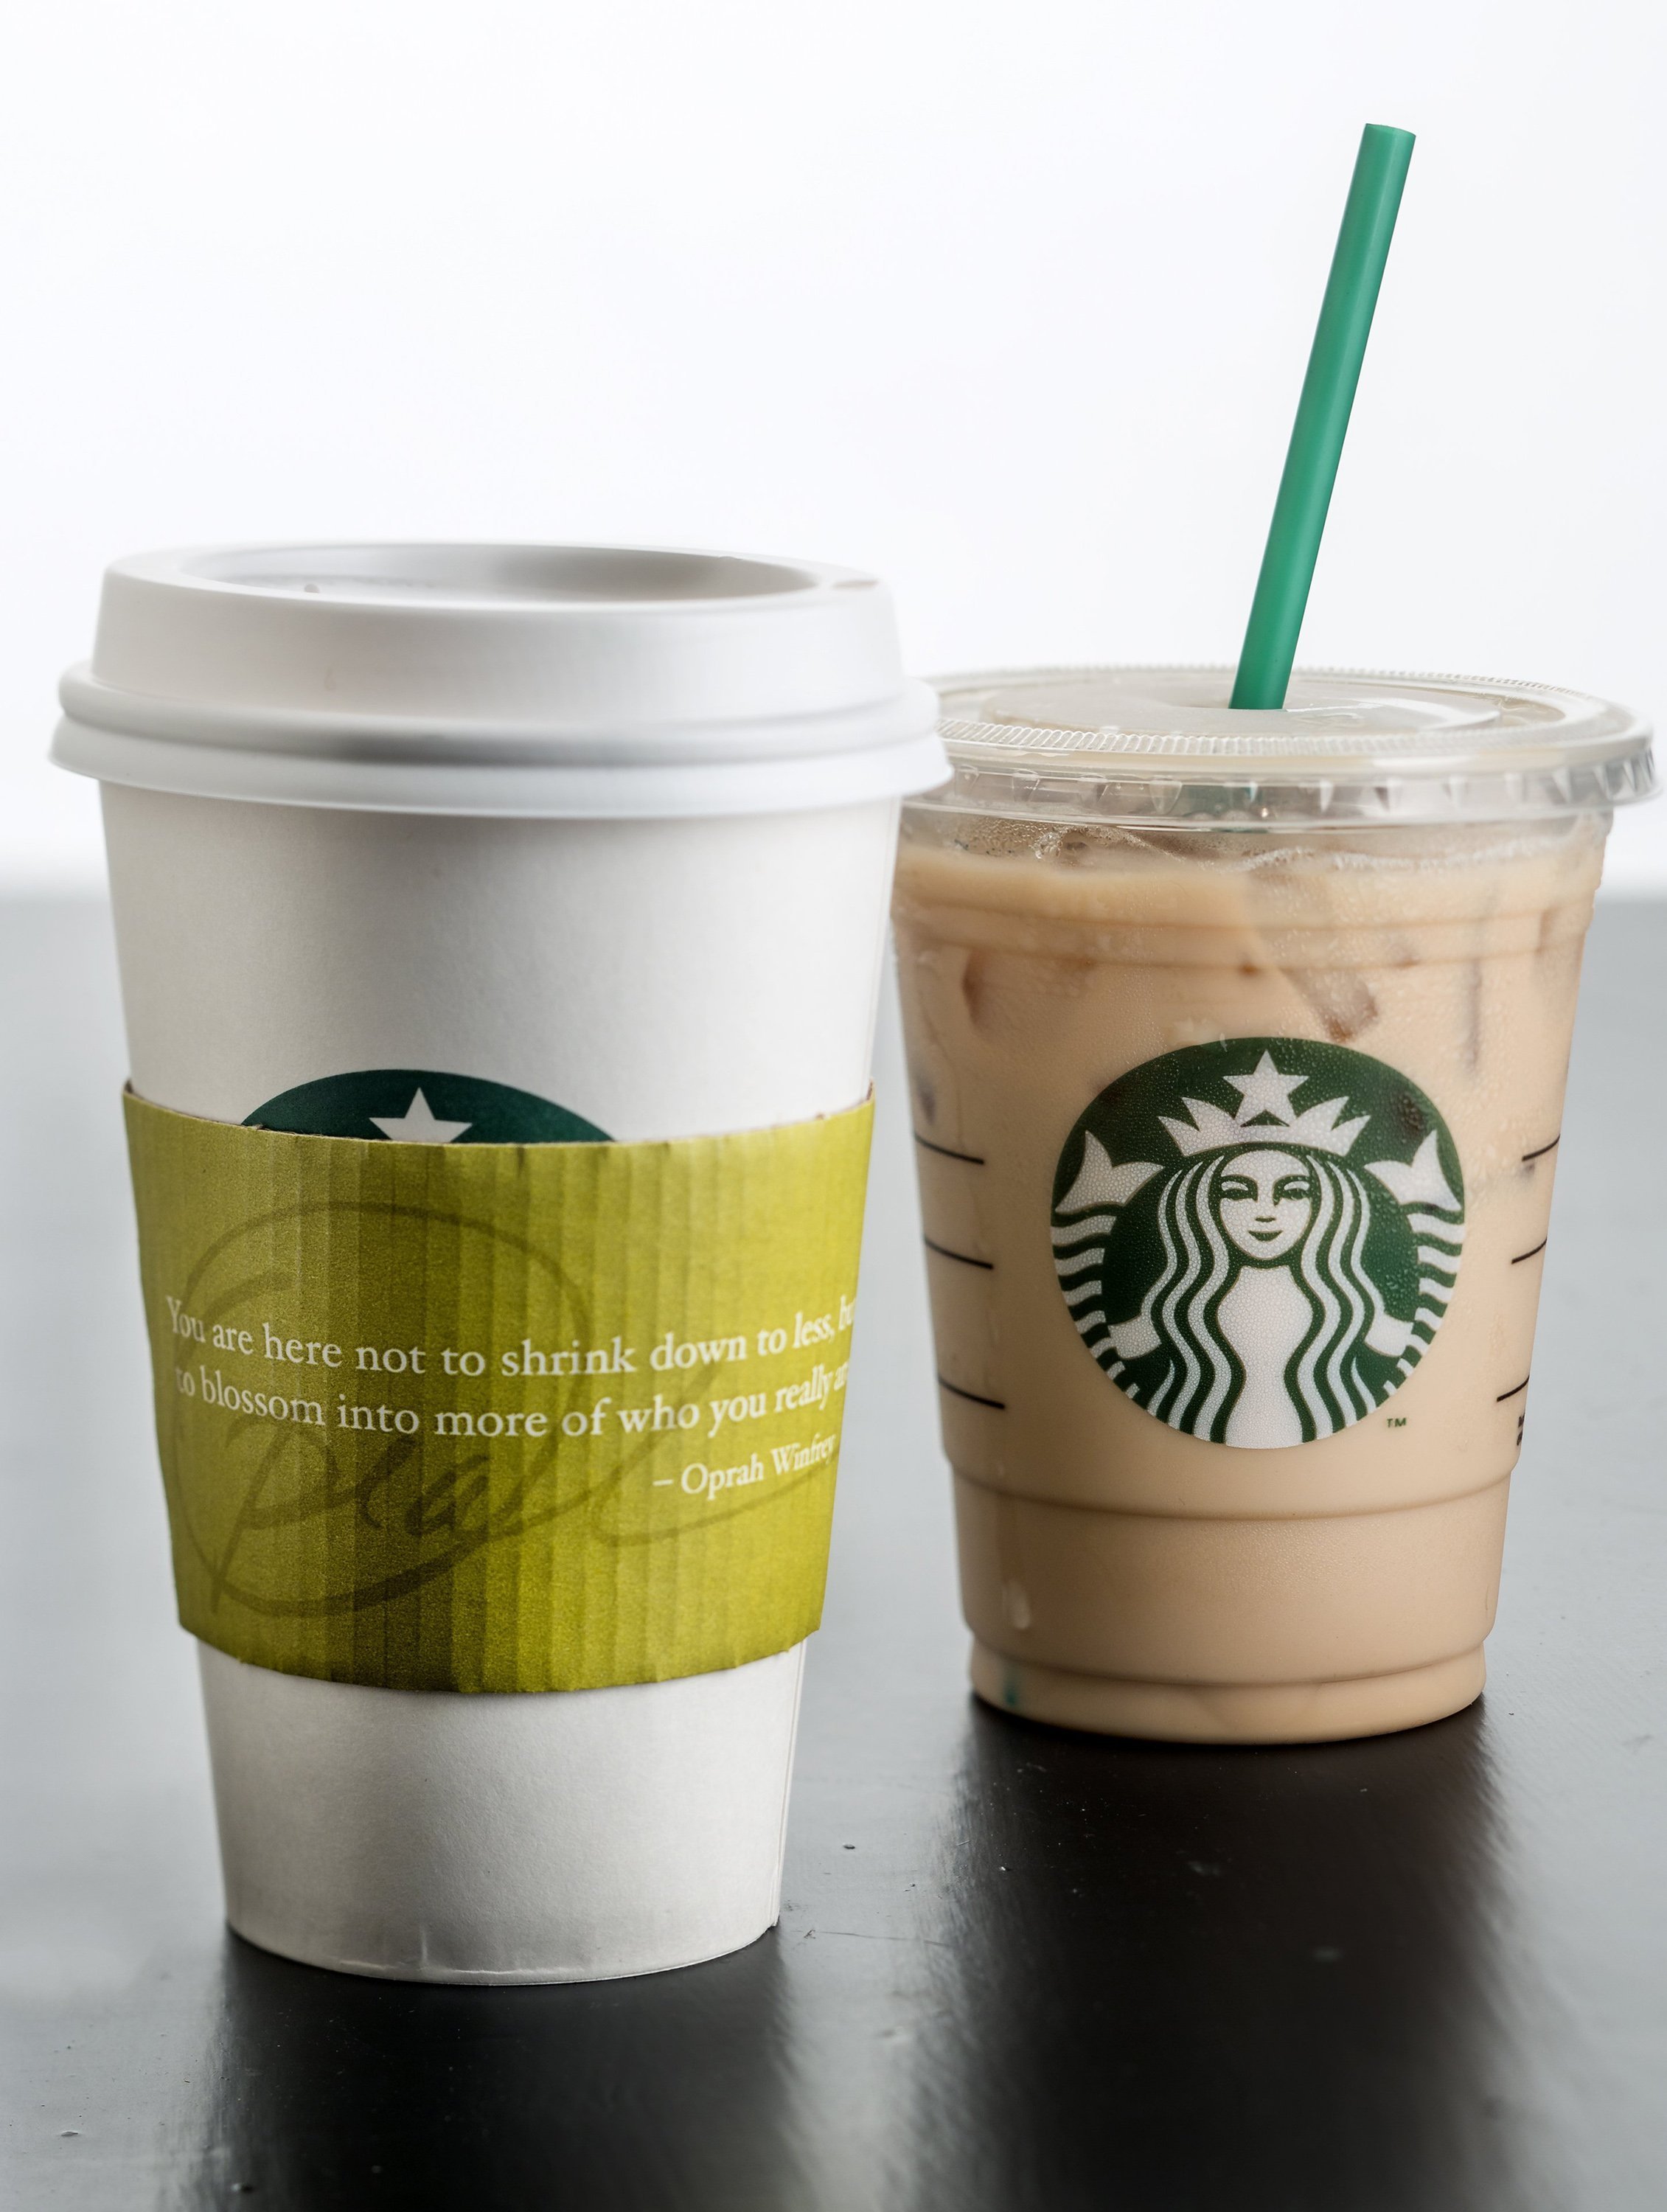 Chai tea from Oprah Winfrey is available in hot and cold servings at Starbucks. (Chicago Tribune&mdash;MCT via Getty Images)